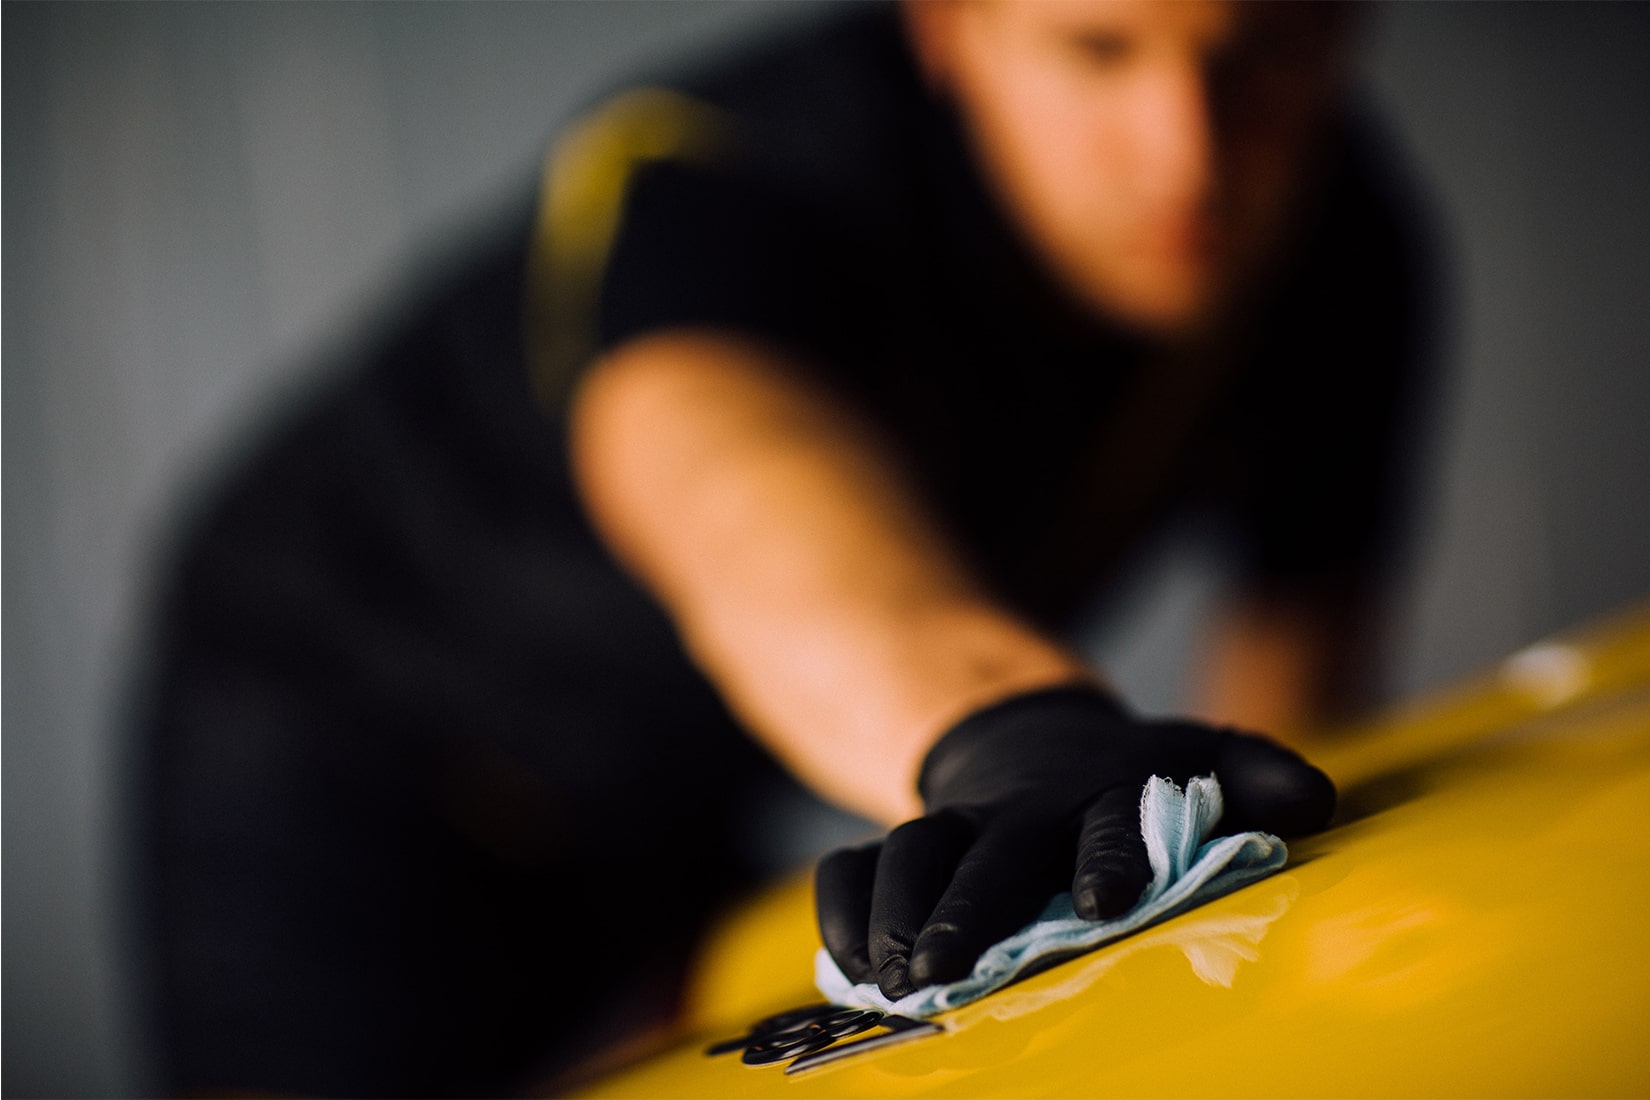 A RestorFX technician cleaning a sleek yellow sports car with a tack cloth in preparation for surface restoration